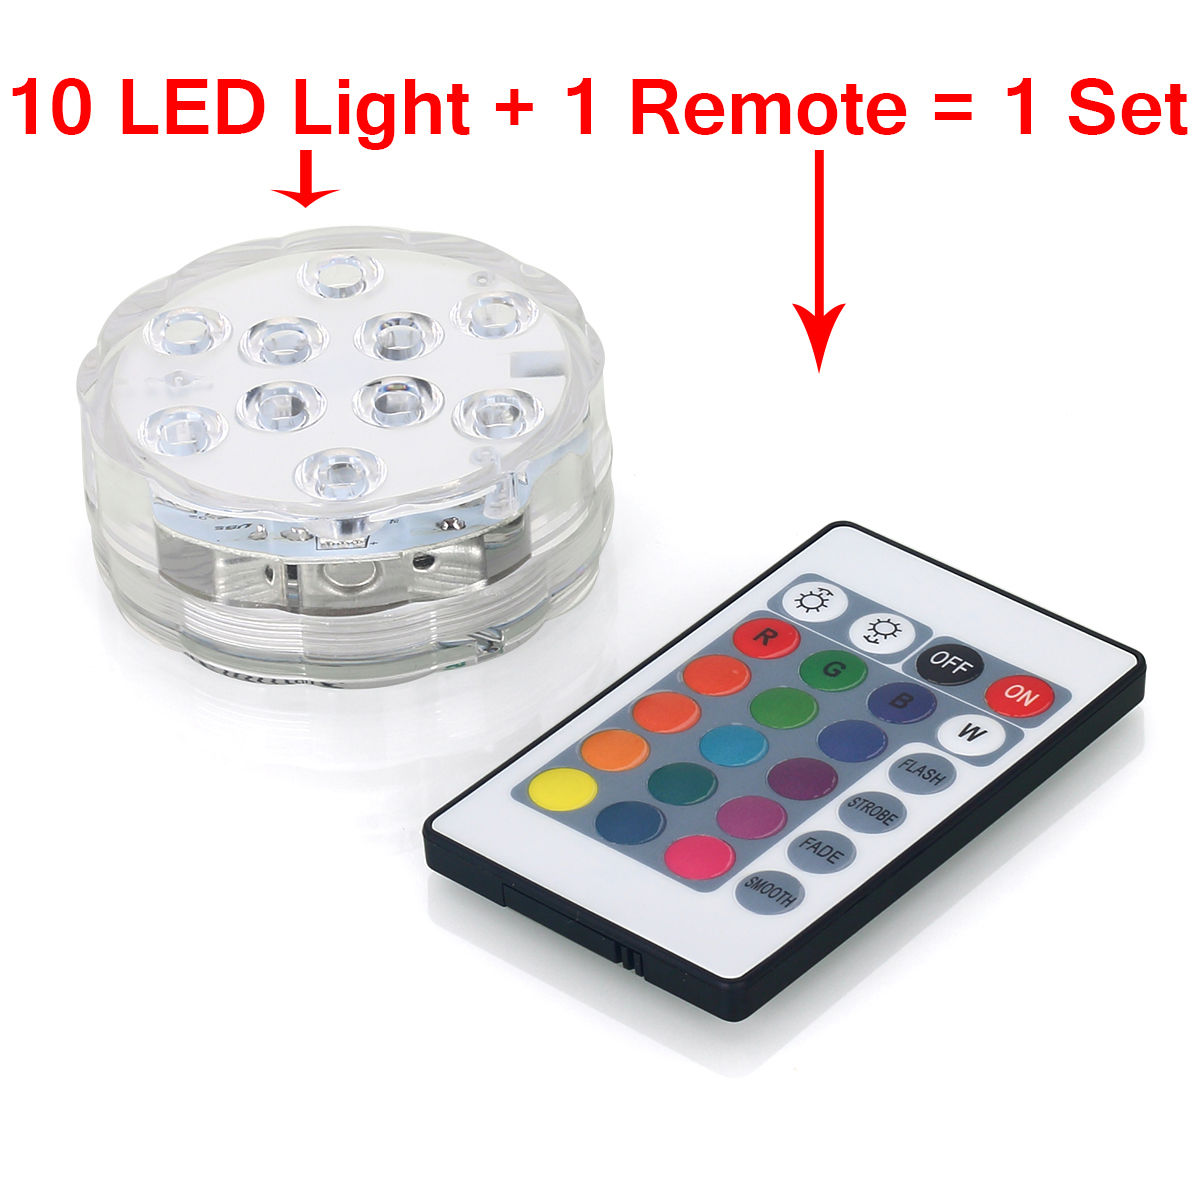 1X 10LED Waterproof Submersible RGB Wedding Party Base Light with Remote Control 